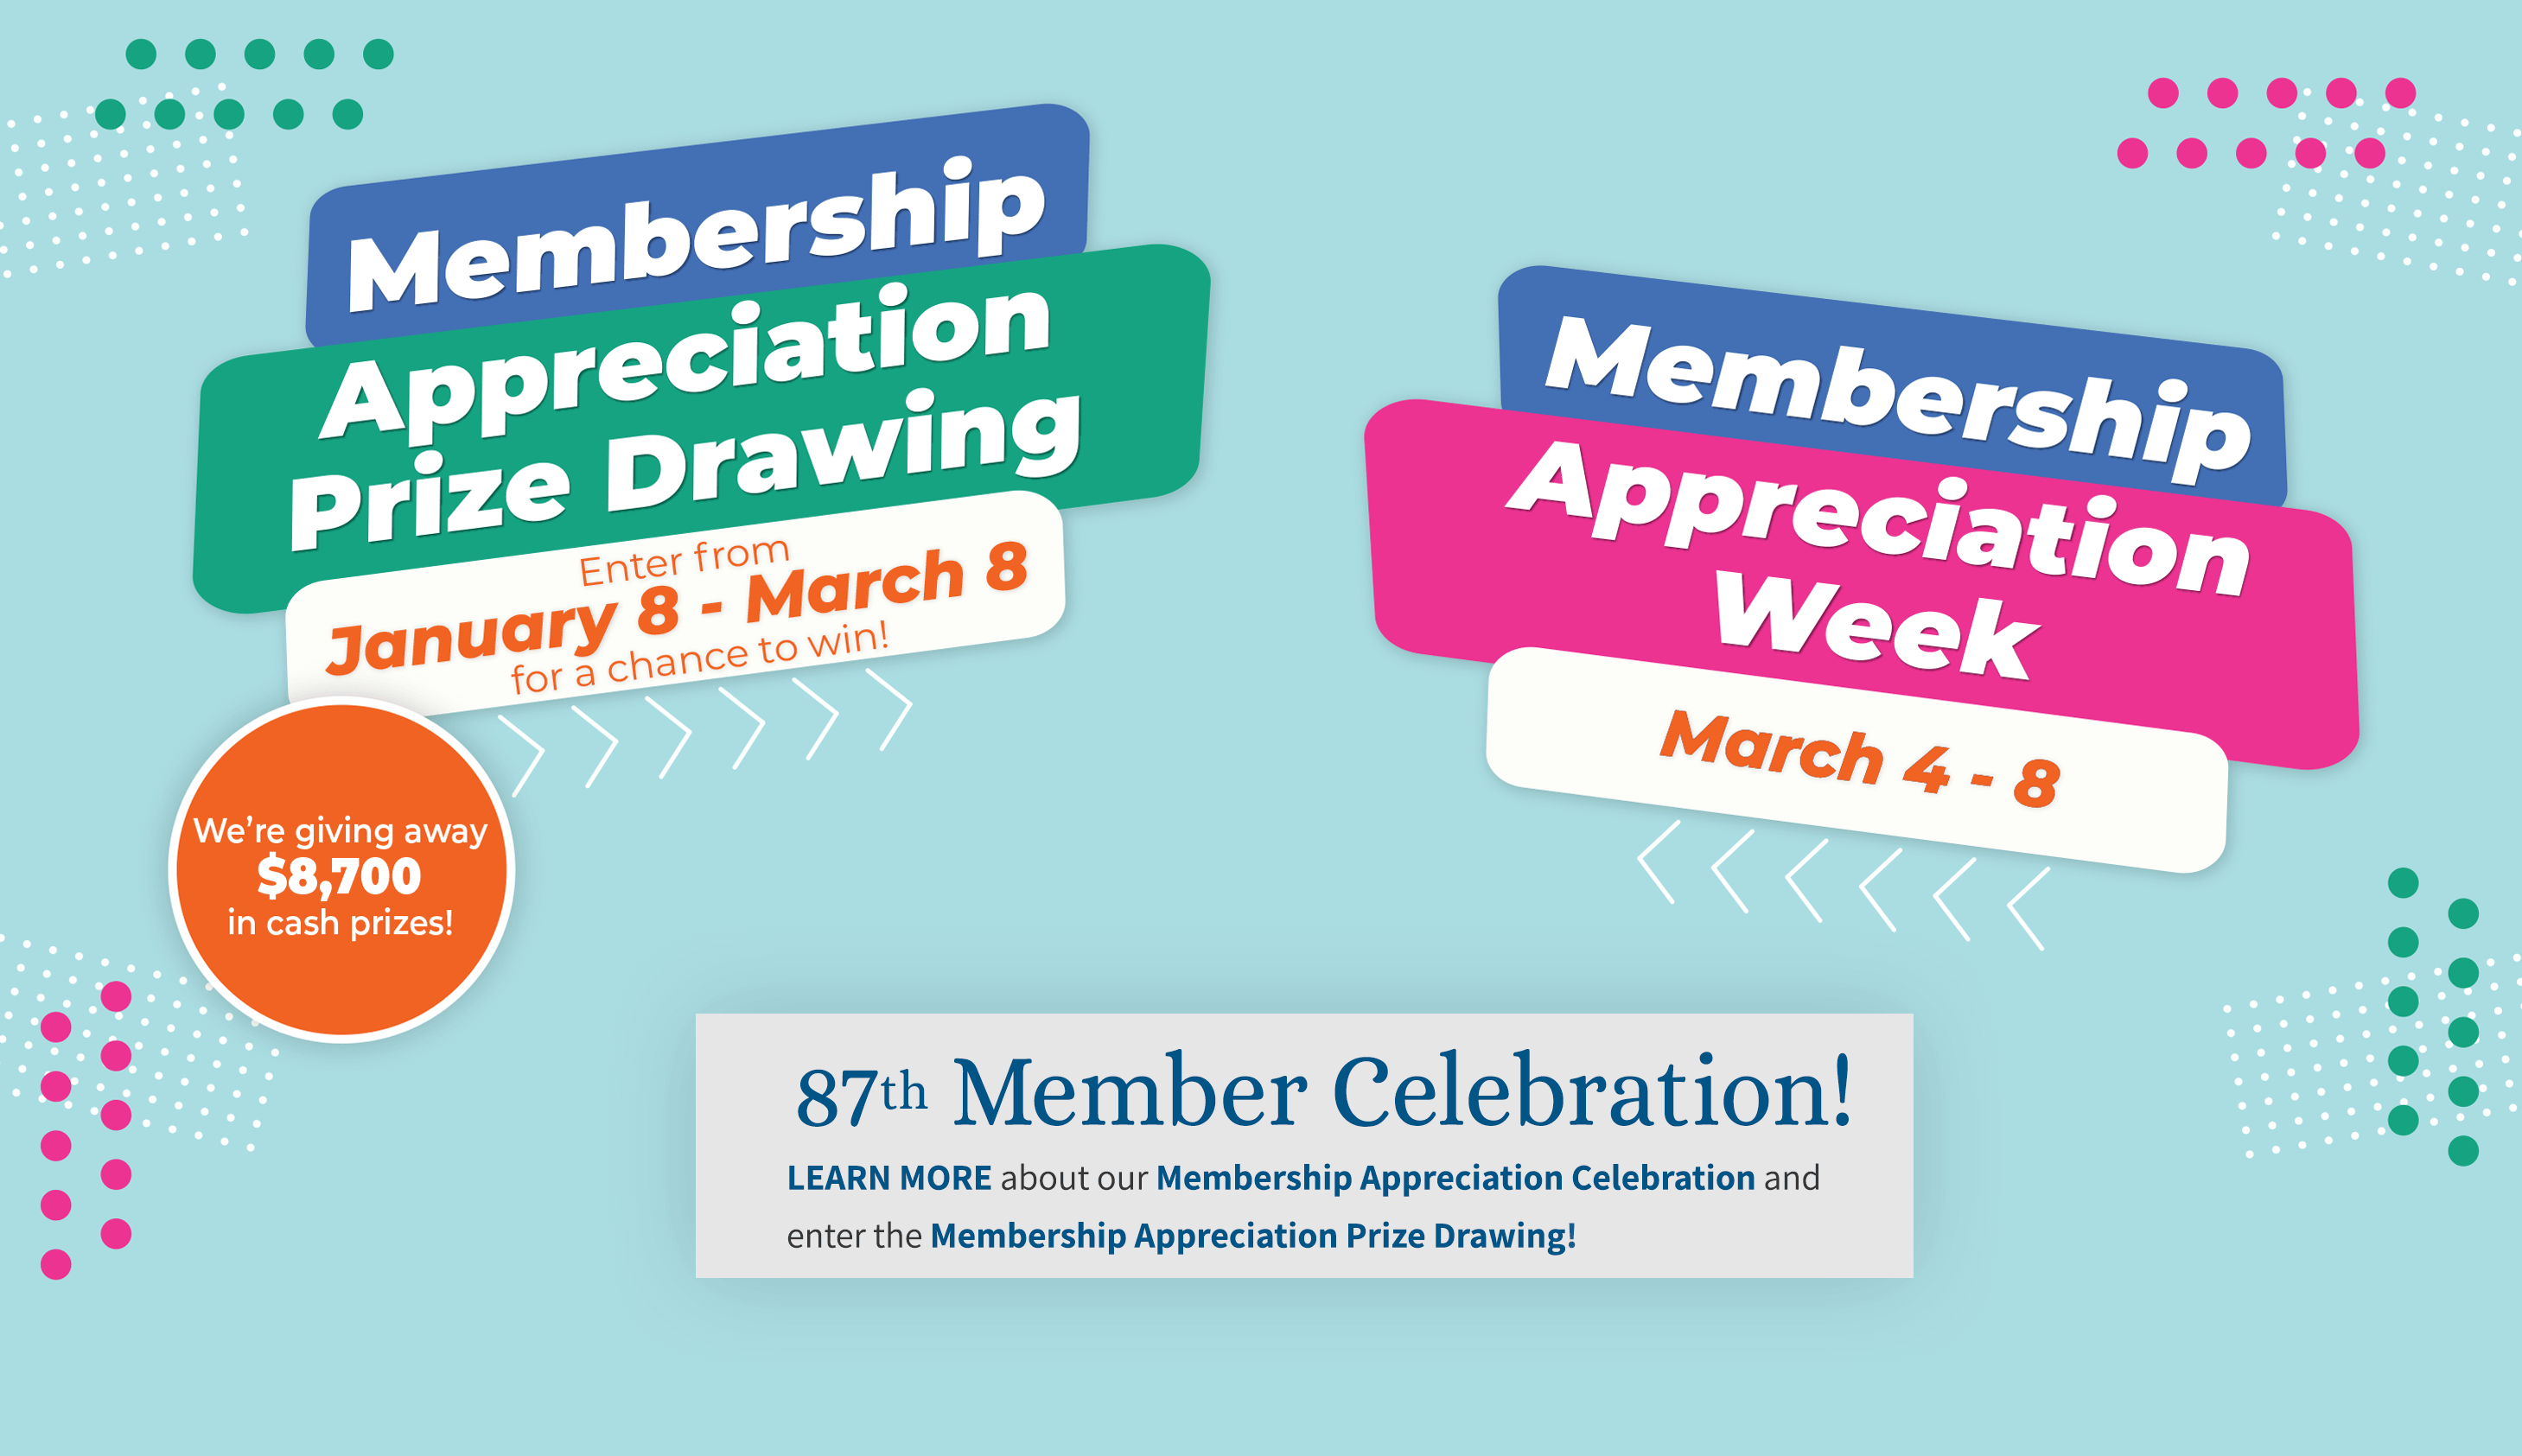 Membership appreciation prize drawing. Enter from January 8 to March 8 for a chance to win. We're giving away $8,700 in cash prizes. Membership Appreciation Week March 4 - 8